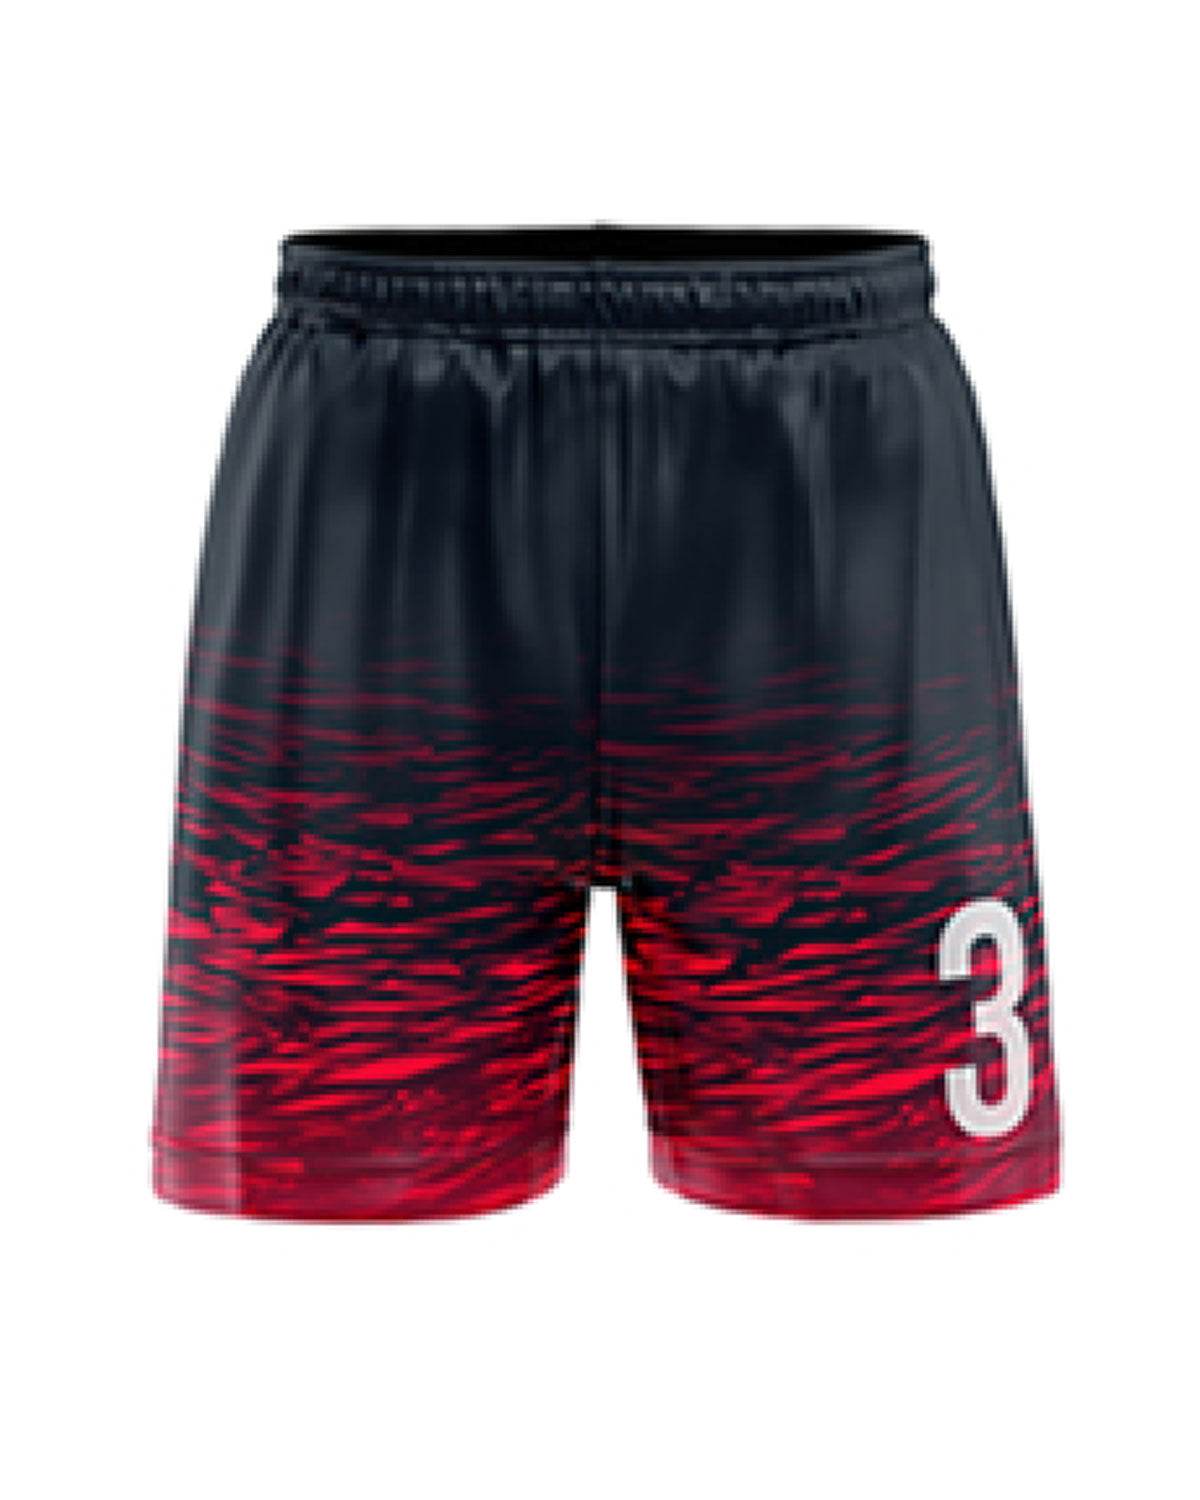 a custom pair of shorts sample black and red